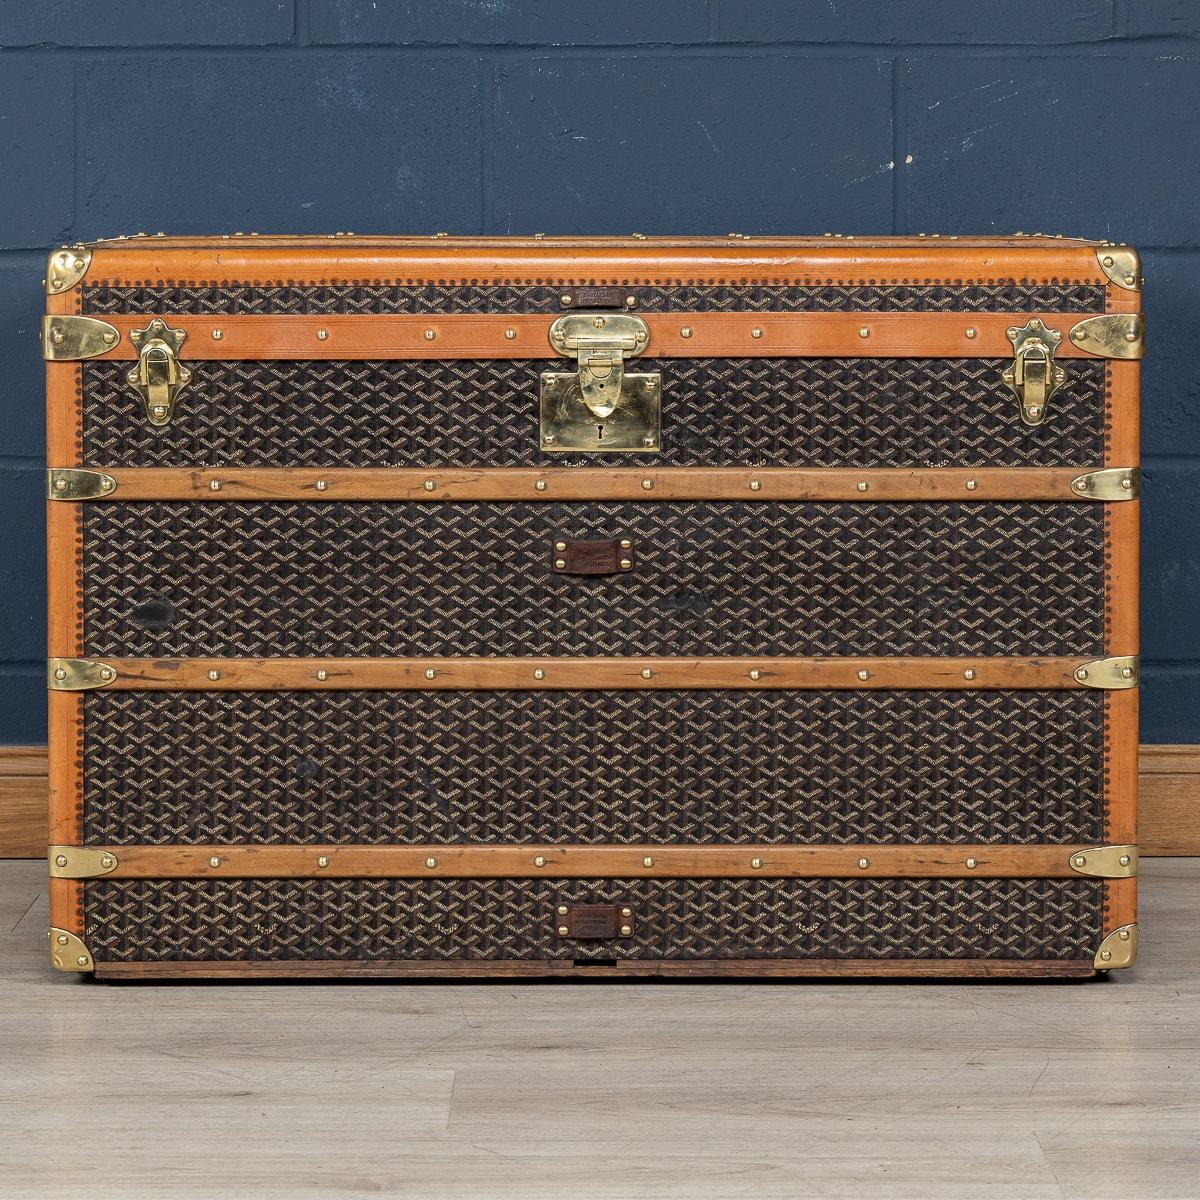 A Goyard courier trunk, completely original and with great character. Dating to the early part of the 20th century (circa 1900/1910) this trunk was finished with the famous chevron canvas and oozes character. A wonderful way of bringing a touch of